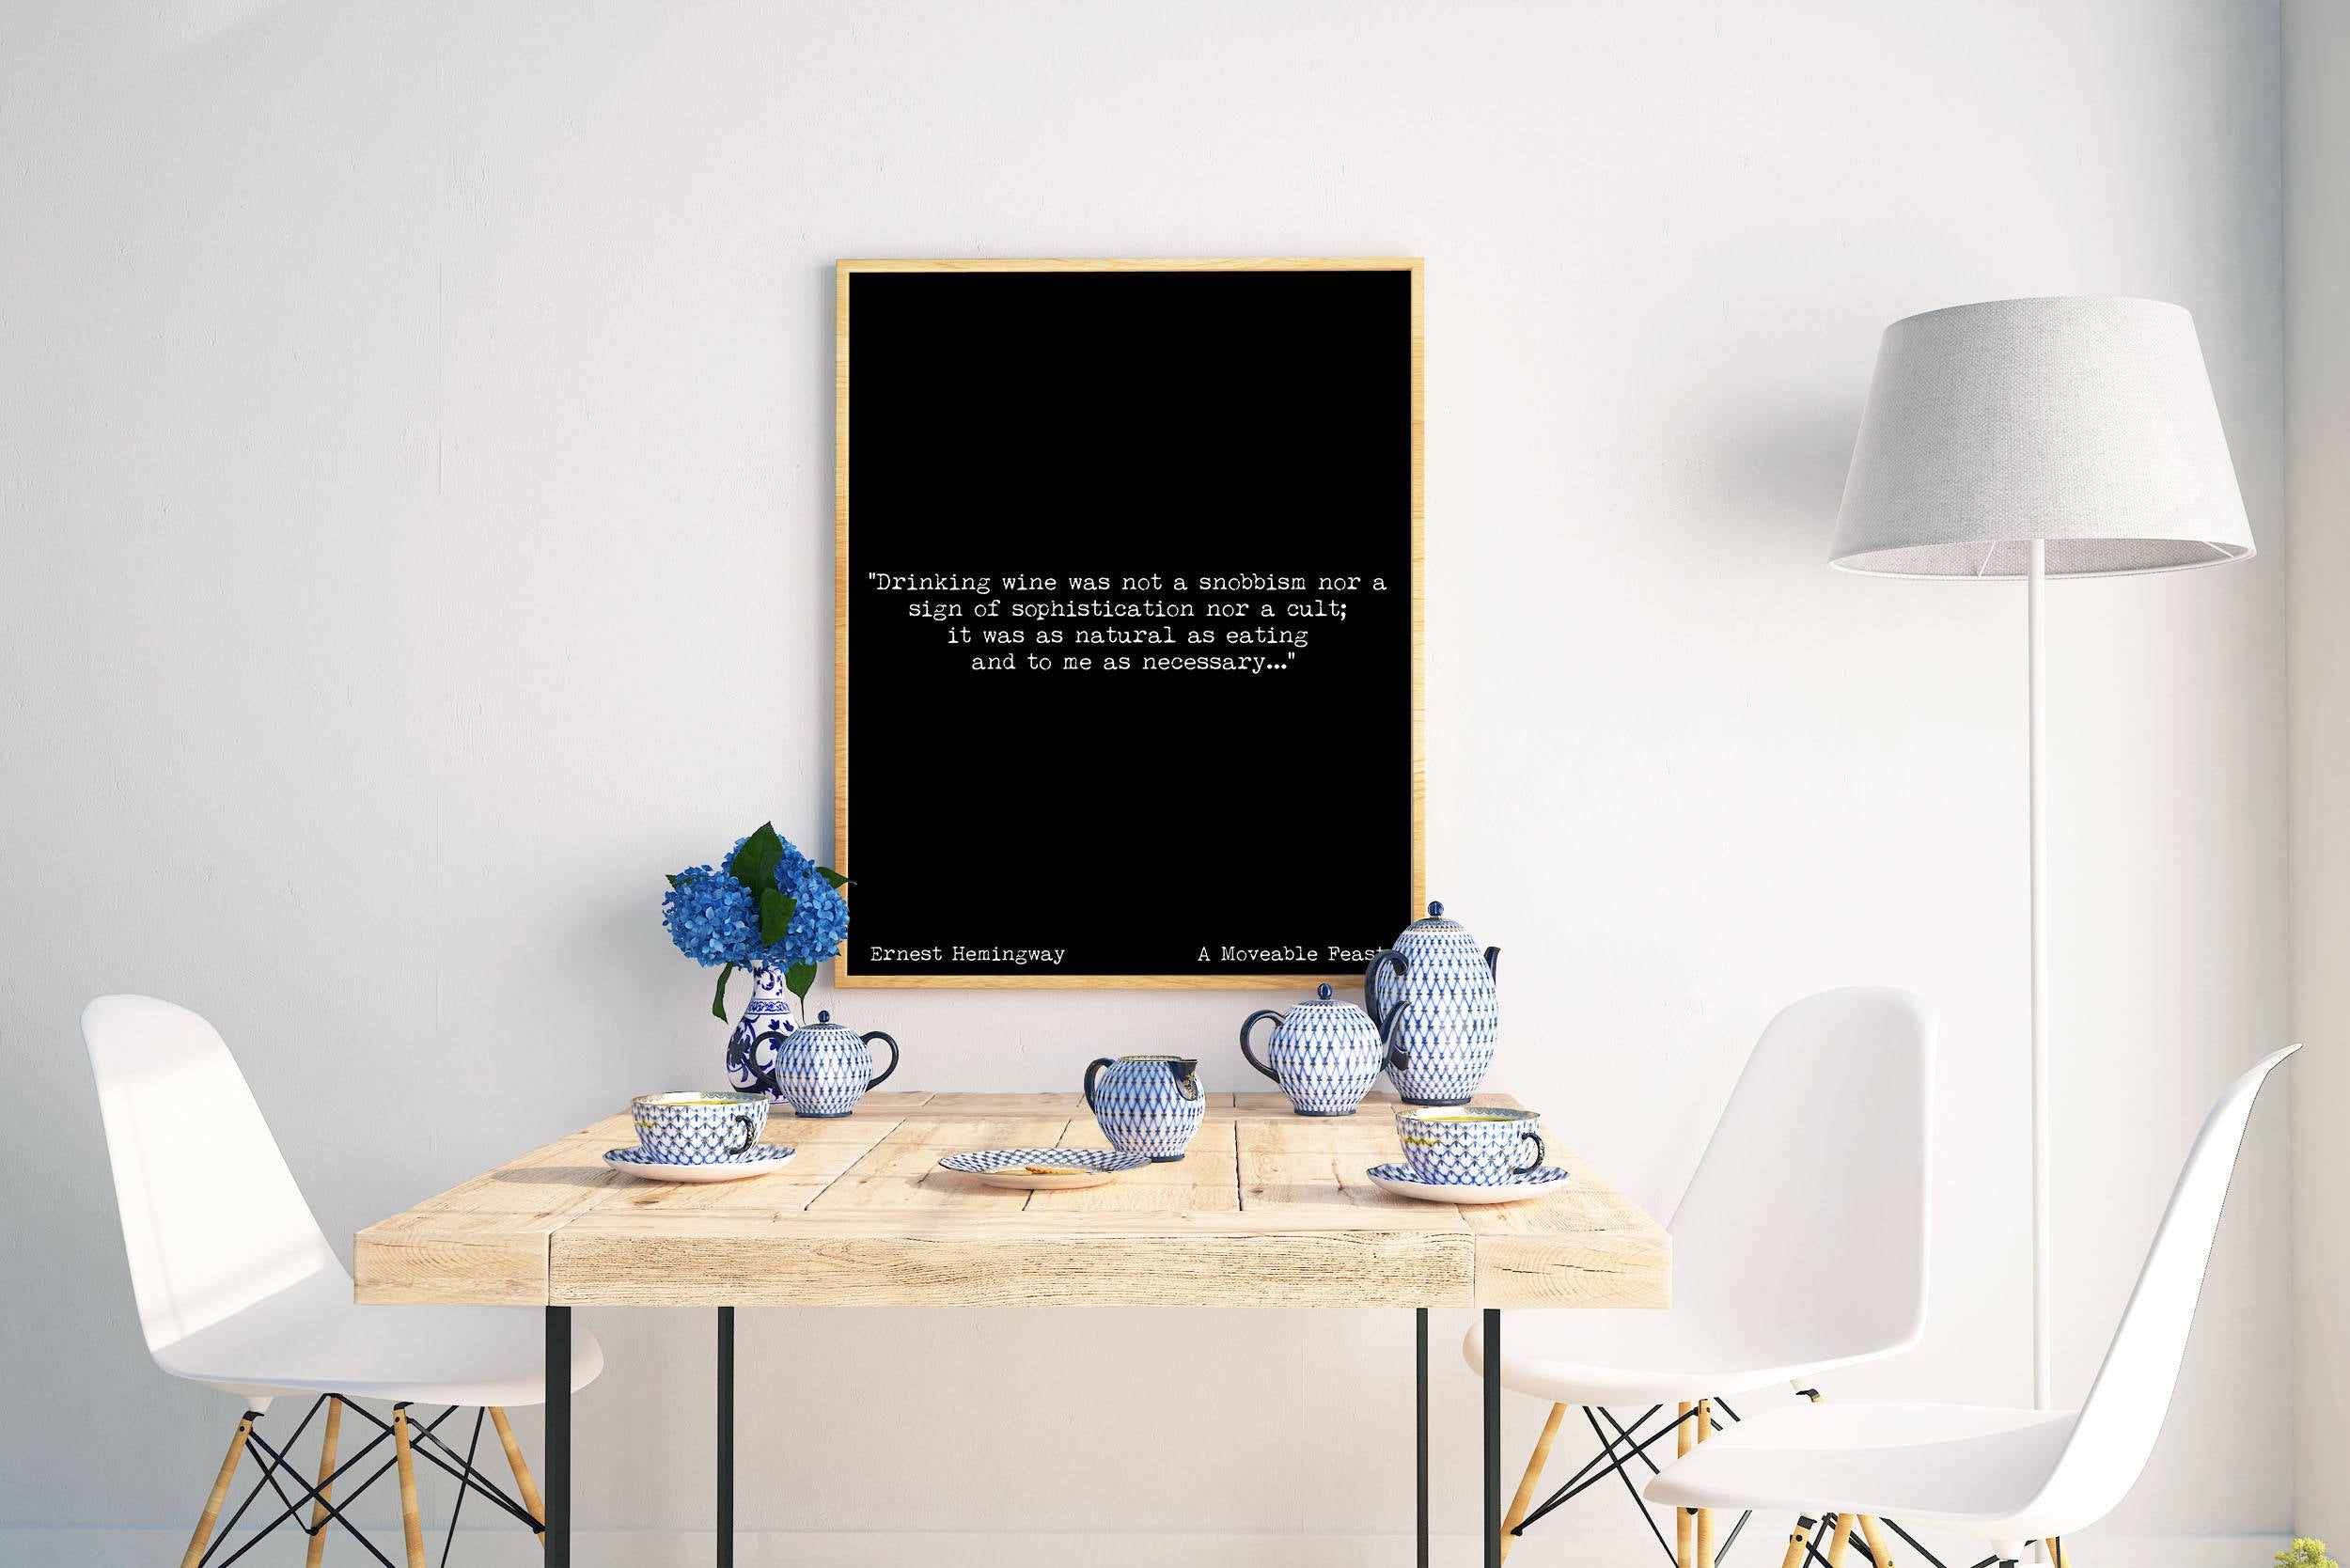 Ernest Hemingway Wine Quote Print from A Moveable Feast Book Quote Decor for Kitchen or Dining Room Wall Art